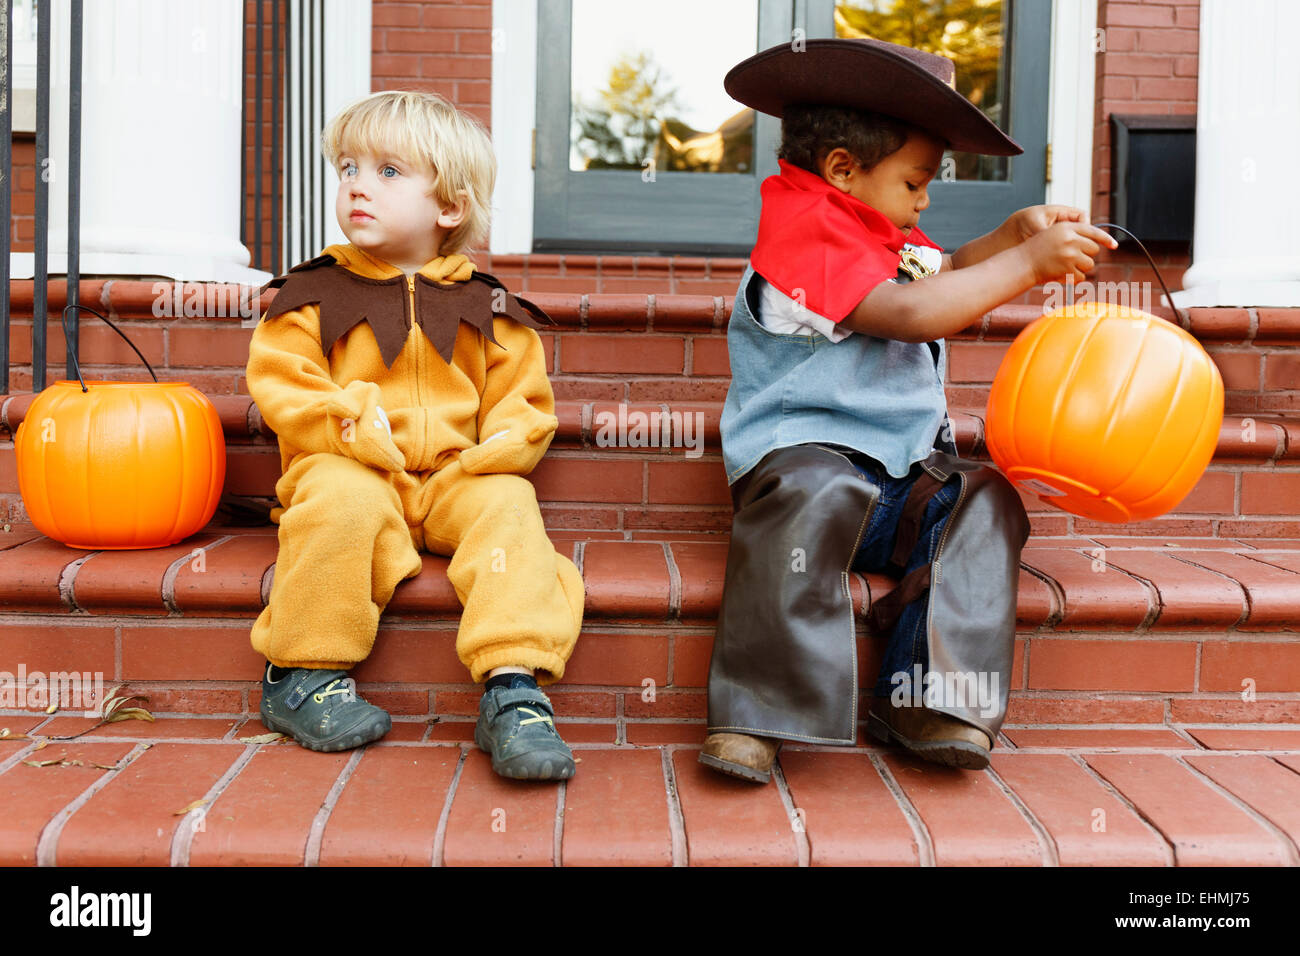 Boys in costumes trick sitting on front stoop on Halloween Stock Photo